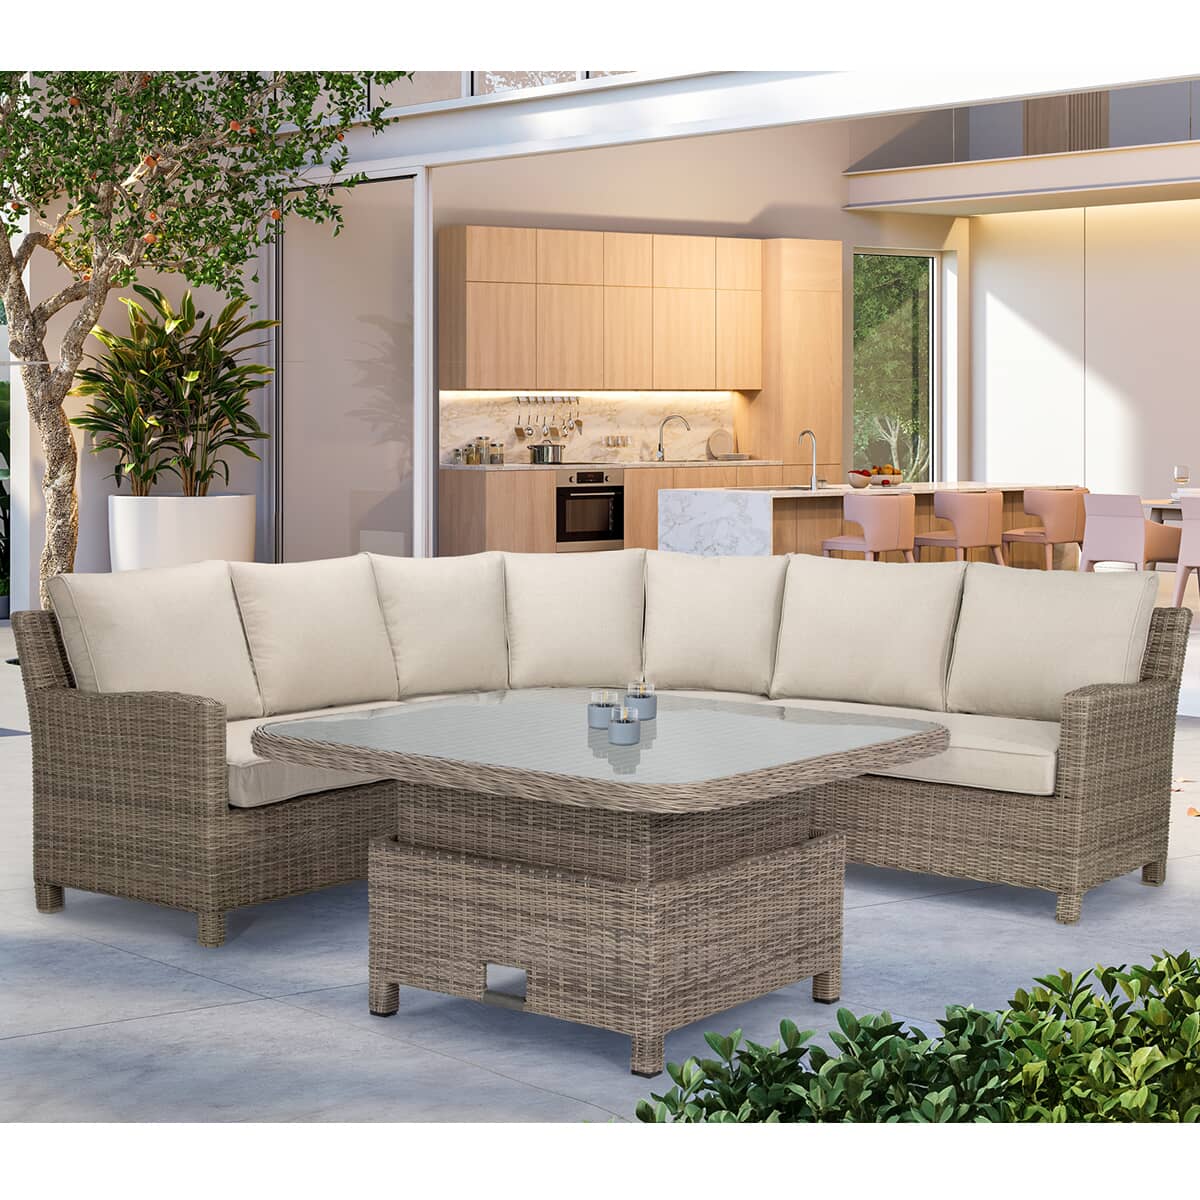 Kettler Signature Palma Grande Corner Sofa Set with High/Low Glass Top Table Oyster/Stone